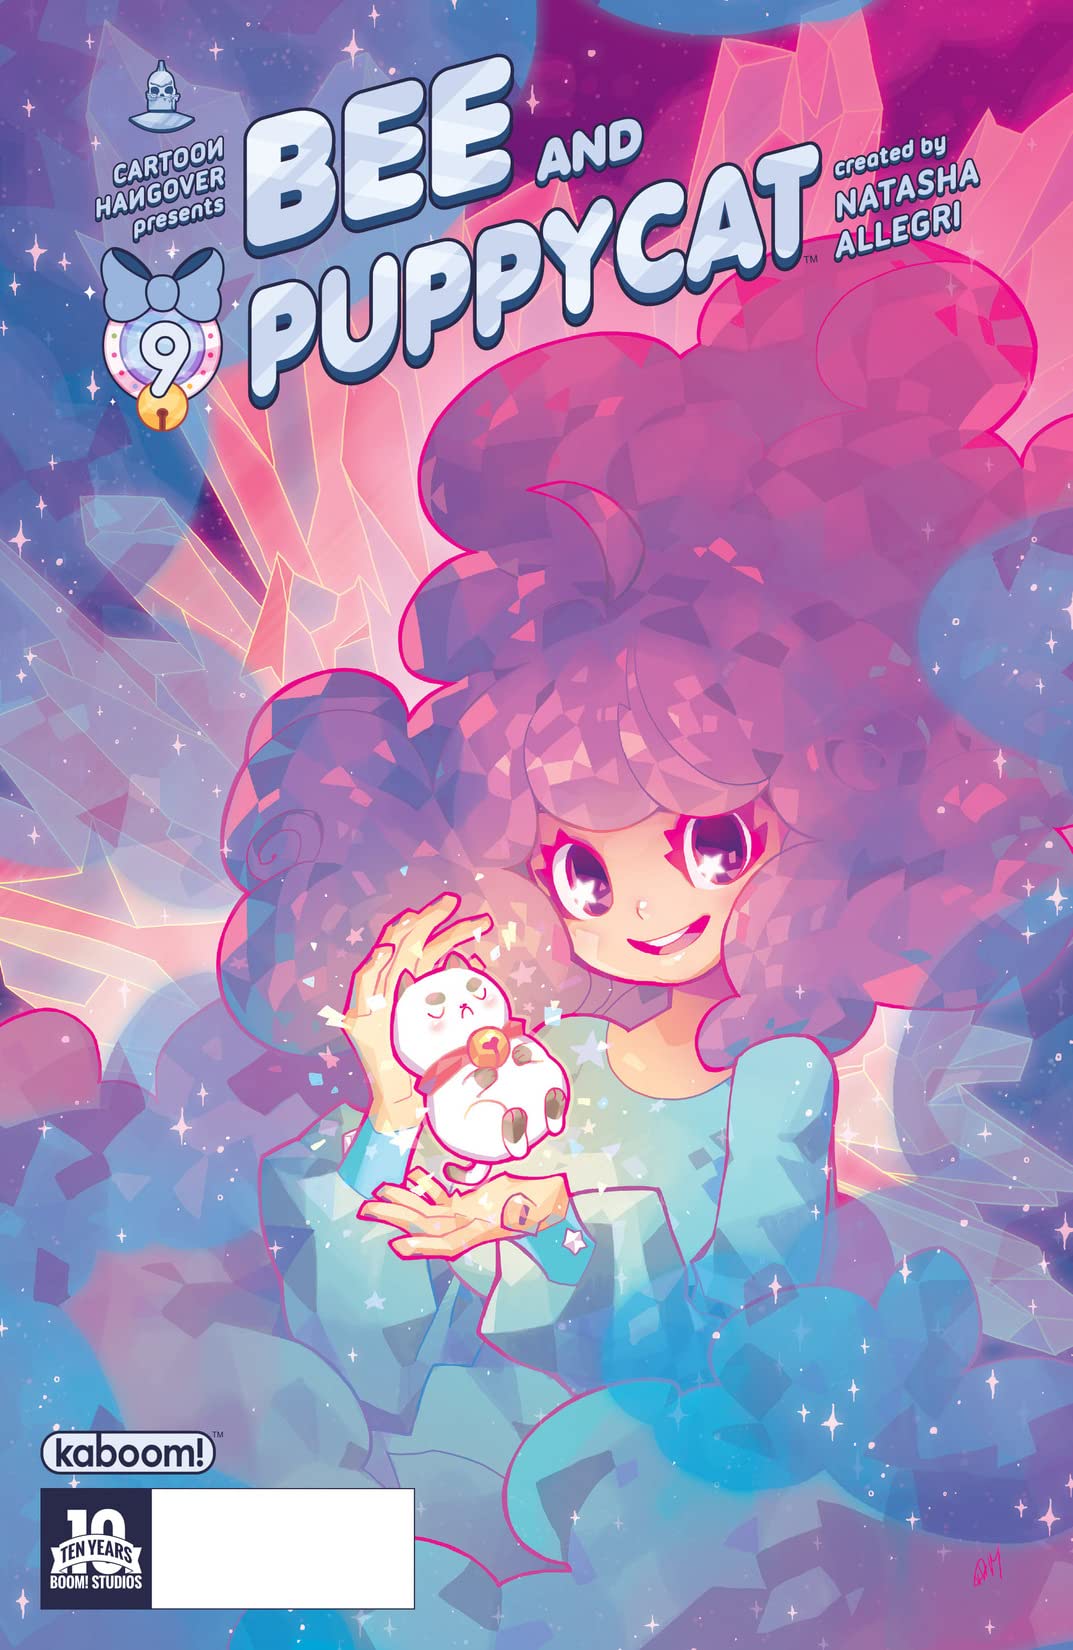 Comic completo Bee and Puppycat